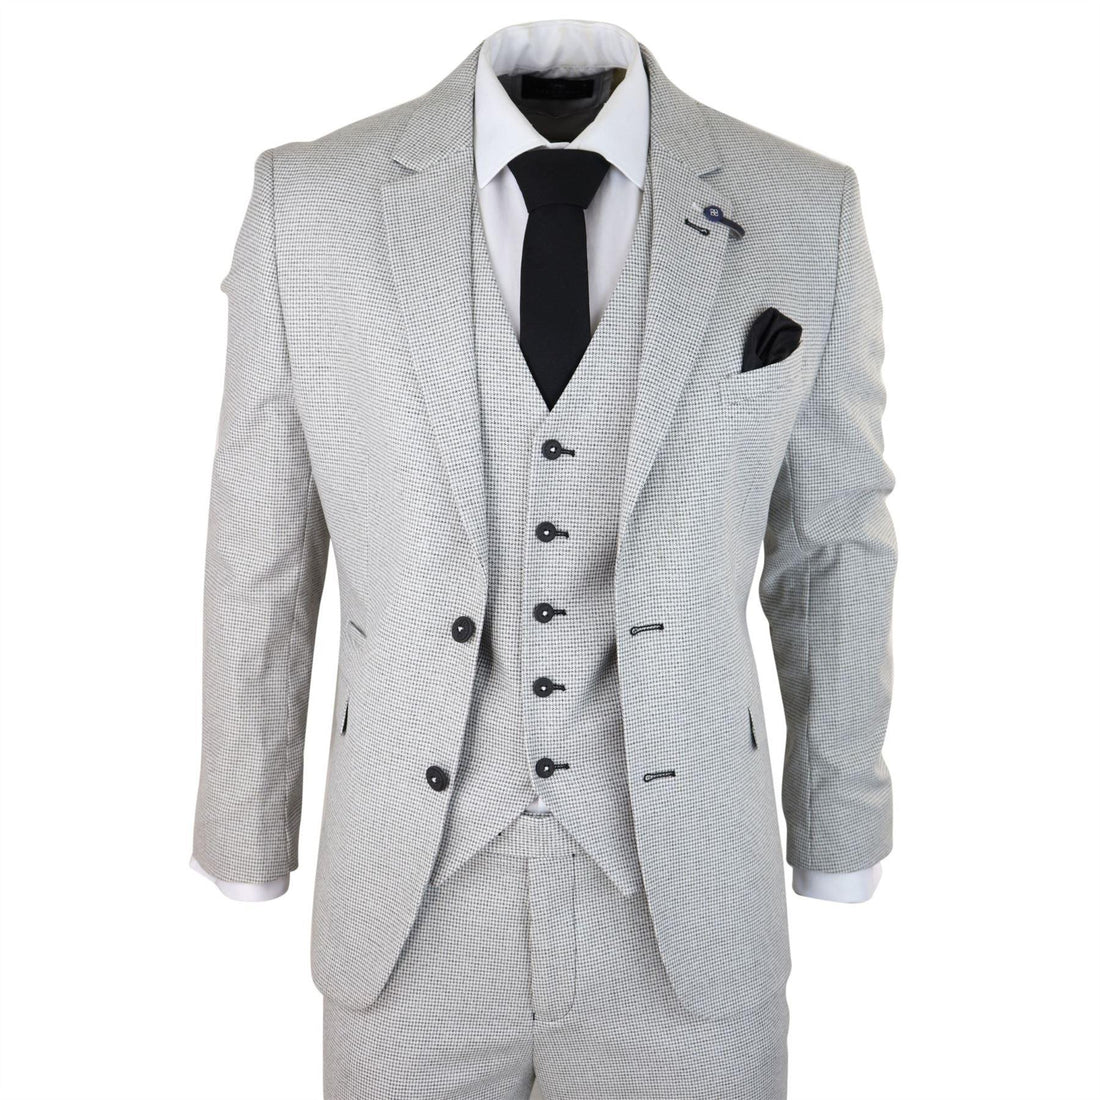 Mens 3 Piece Light Grey Black Check Suit Tailored Fit Retro Vintage Classic Smart - Knighthood Store